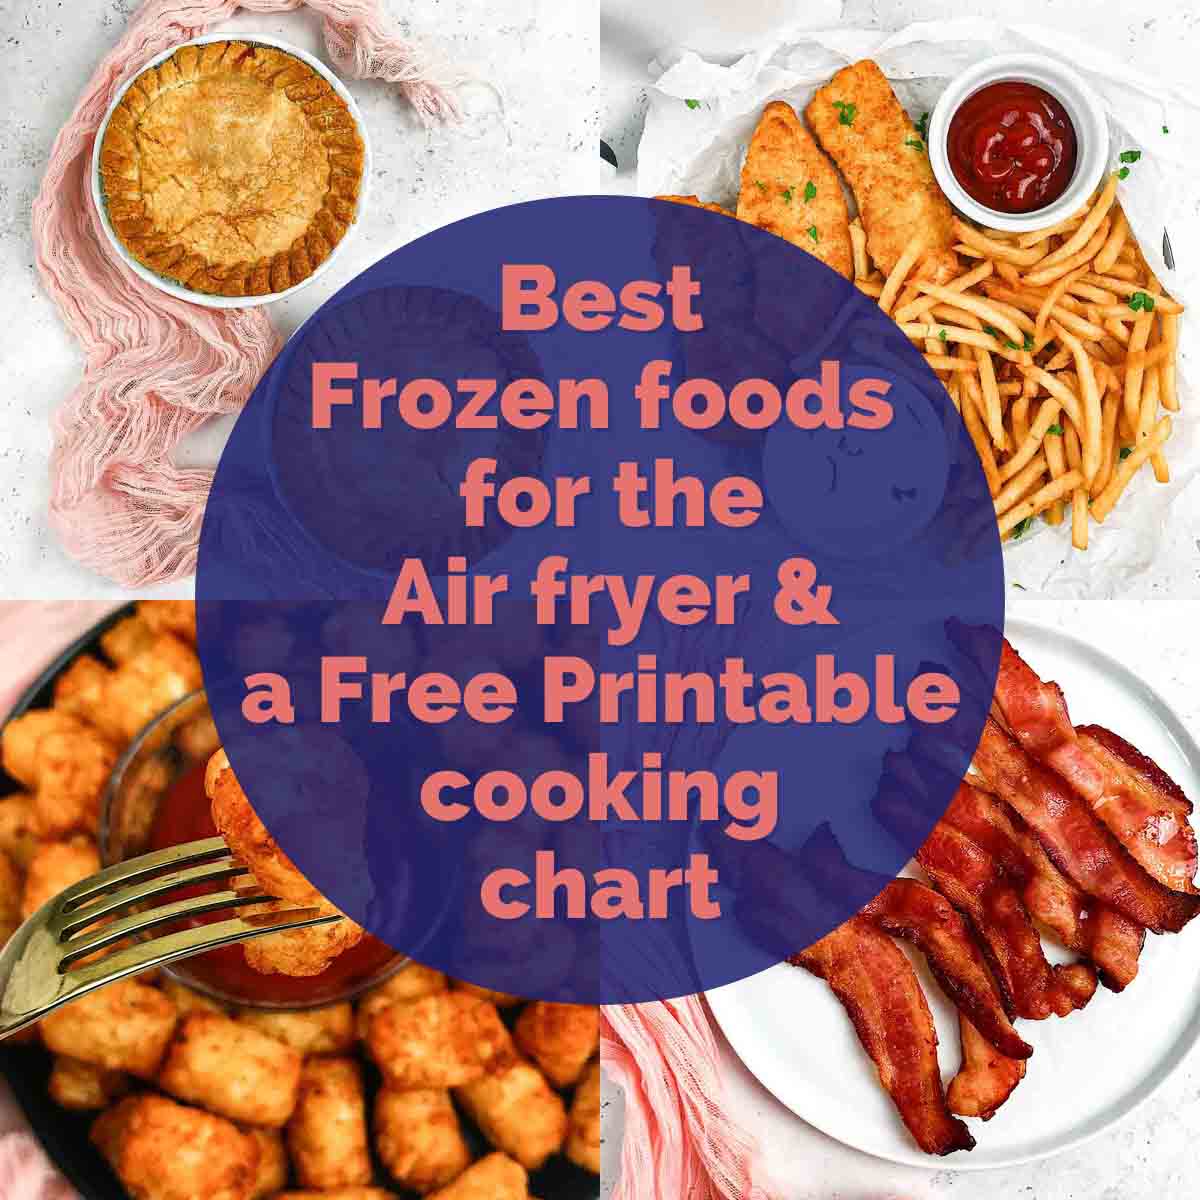 COSORI Air Fryer Cookbook for Beginners UK 2023: Delicious, Quick &  Foolproof COSORI Air Fryer Recipes for Your Whole Family and Friends